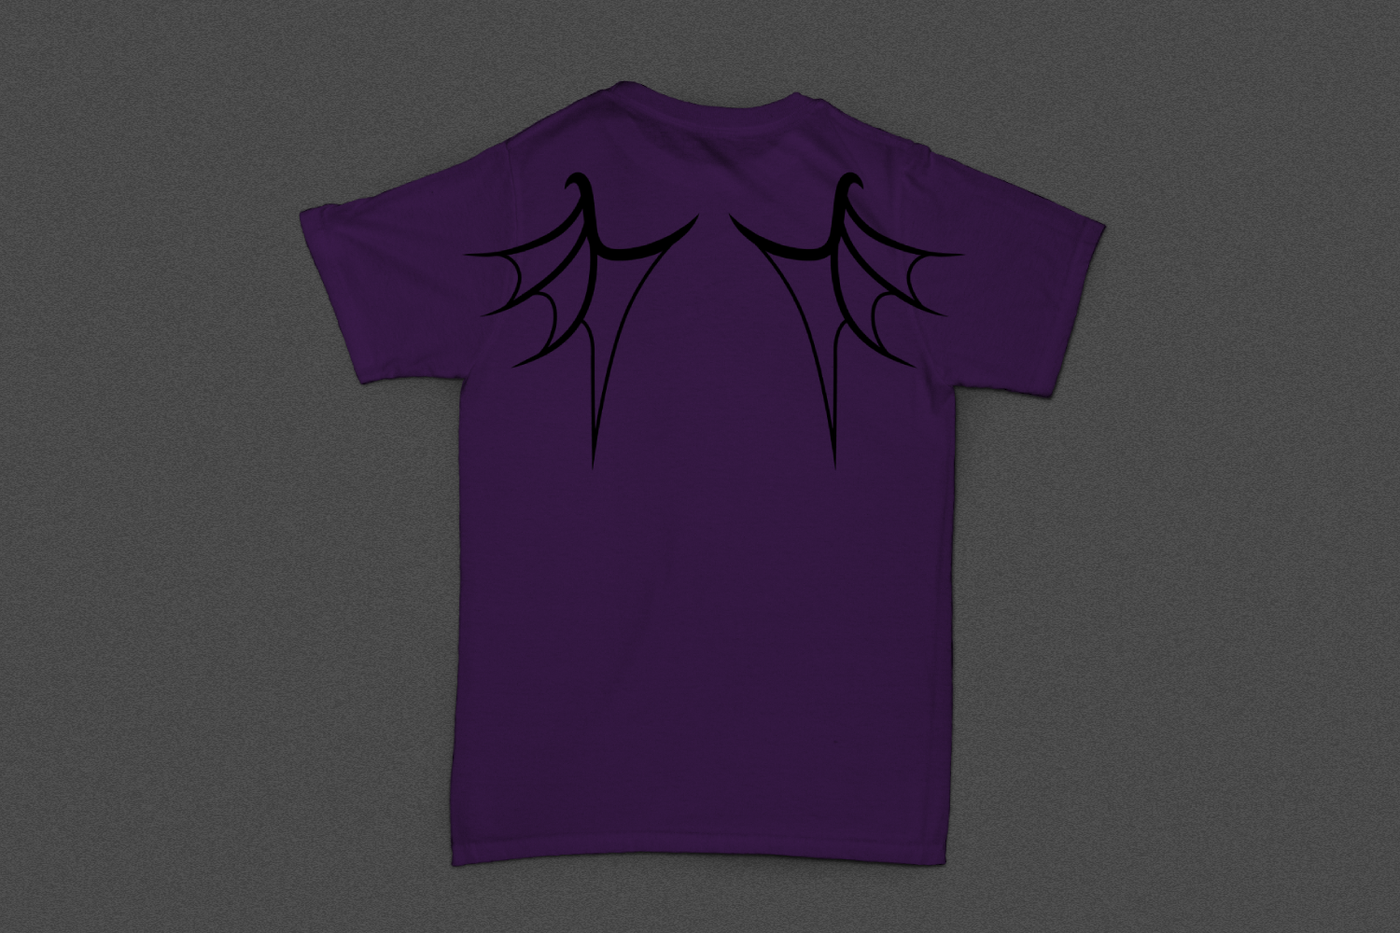 A purple shirt with a dragon wing design on the shoulders.